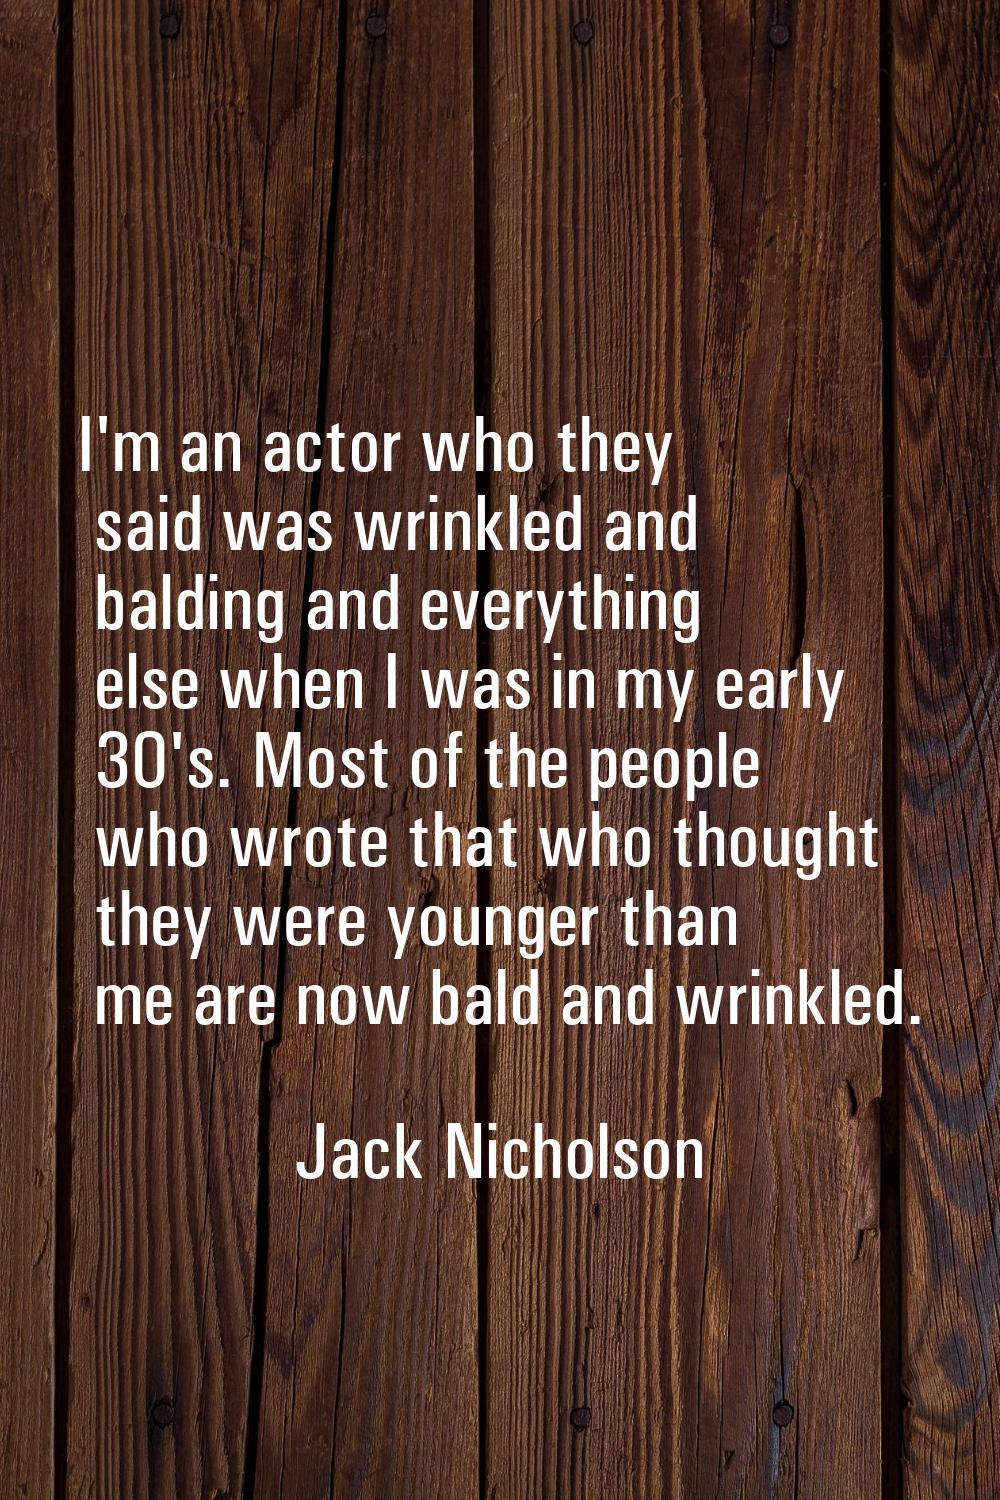 I'm an actor who they said was wrinkled and balding and everything else when I was in my early 30's